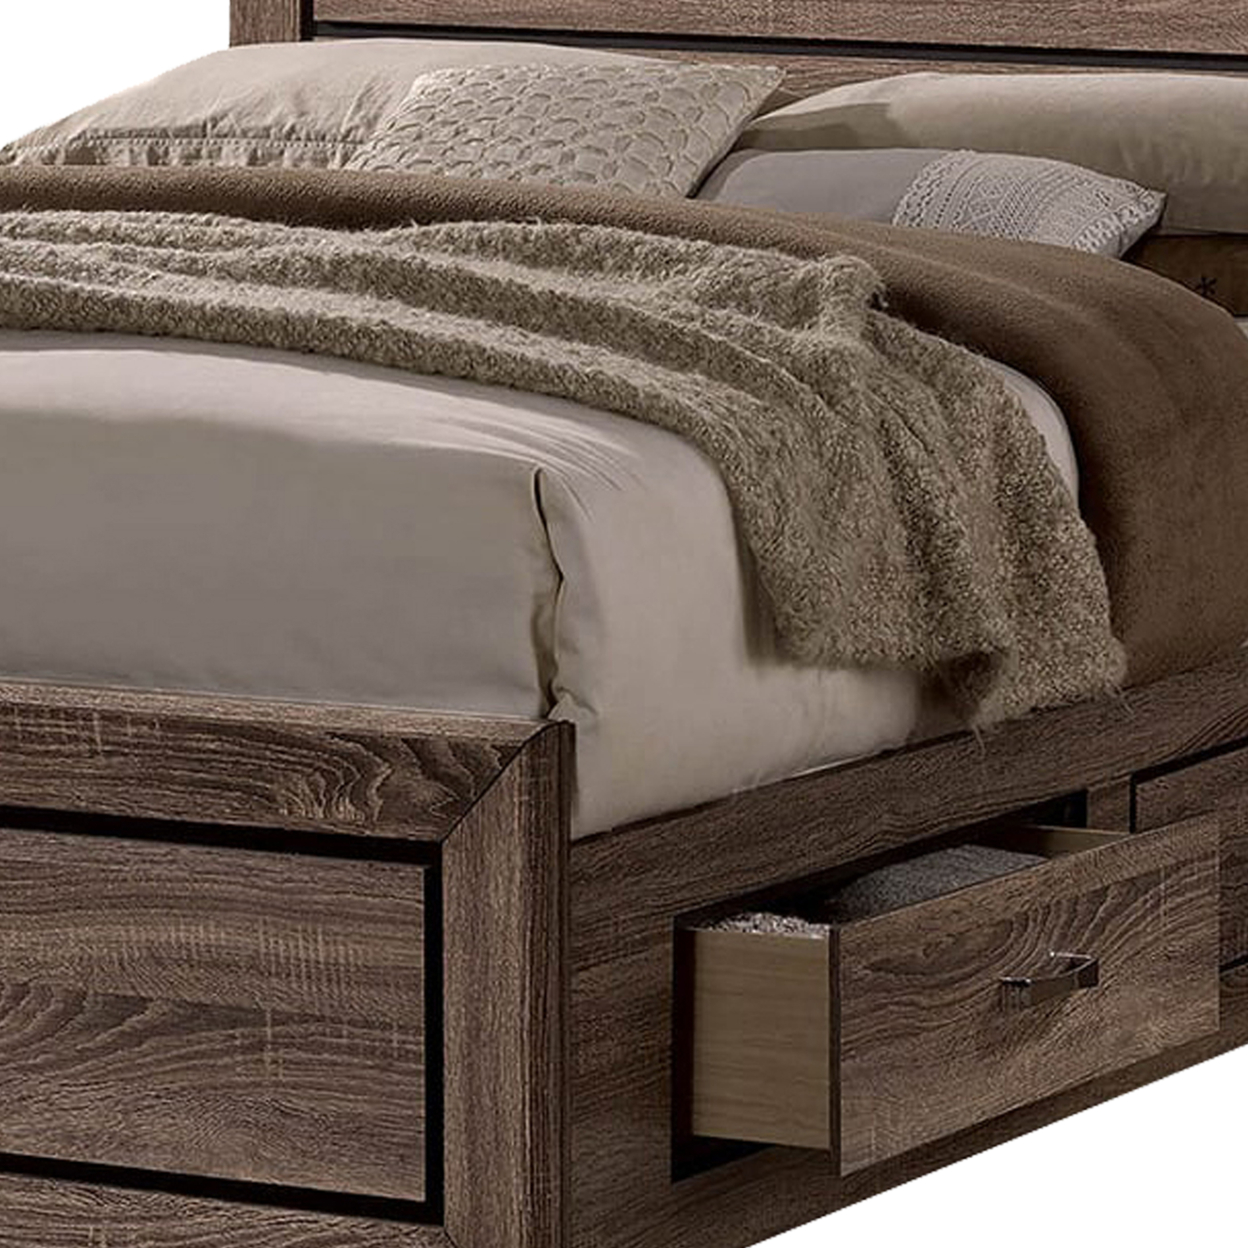 Wooden Queen Size Bed With 4 Spacious Side Rail Drawers, Brown- Saltoro Sherpi